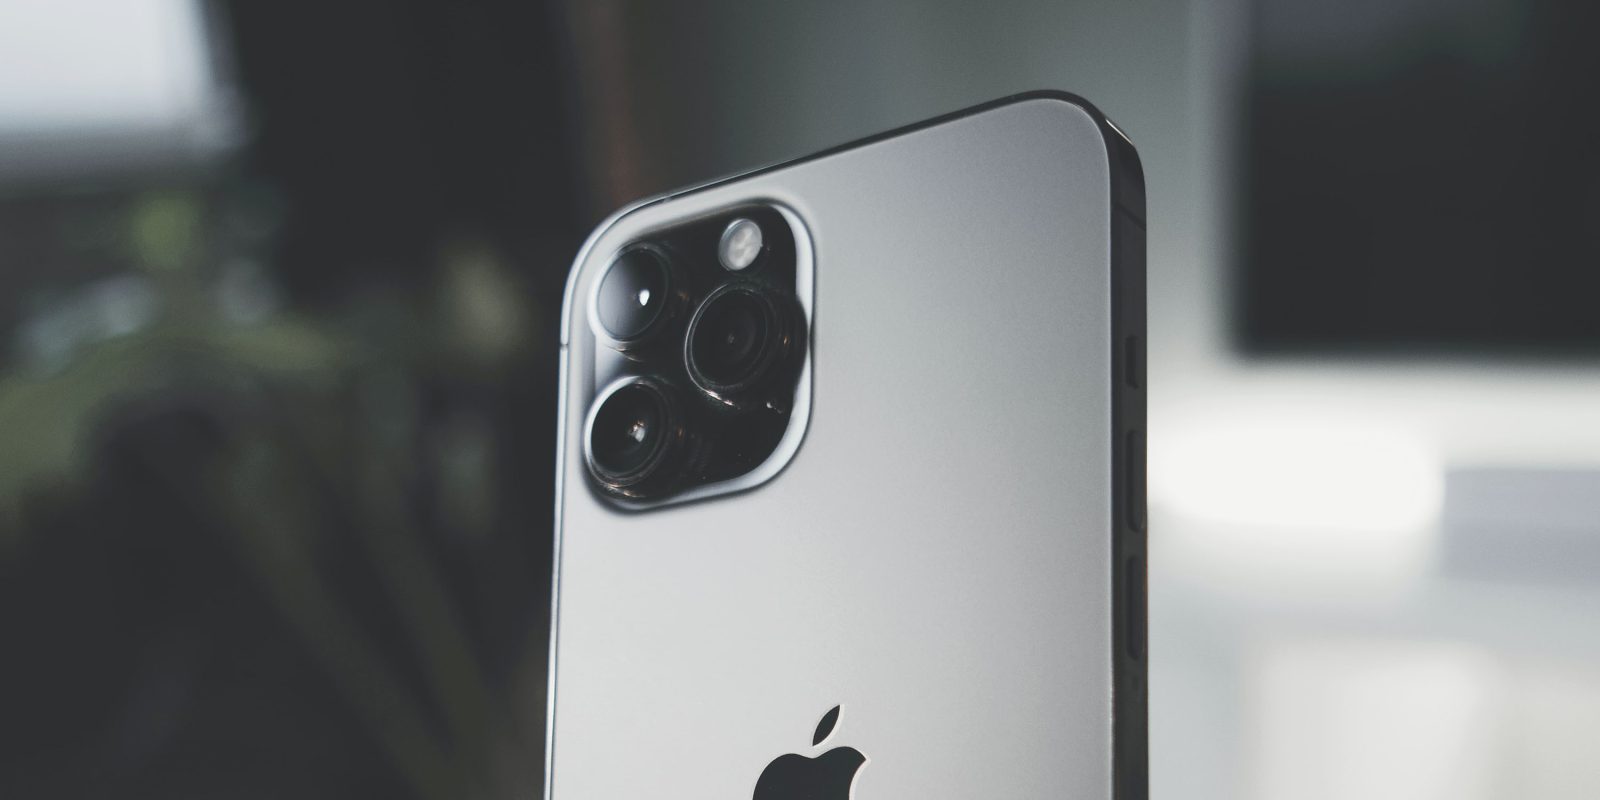 iPhone 13 Pro Max will have better wide-angle lens